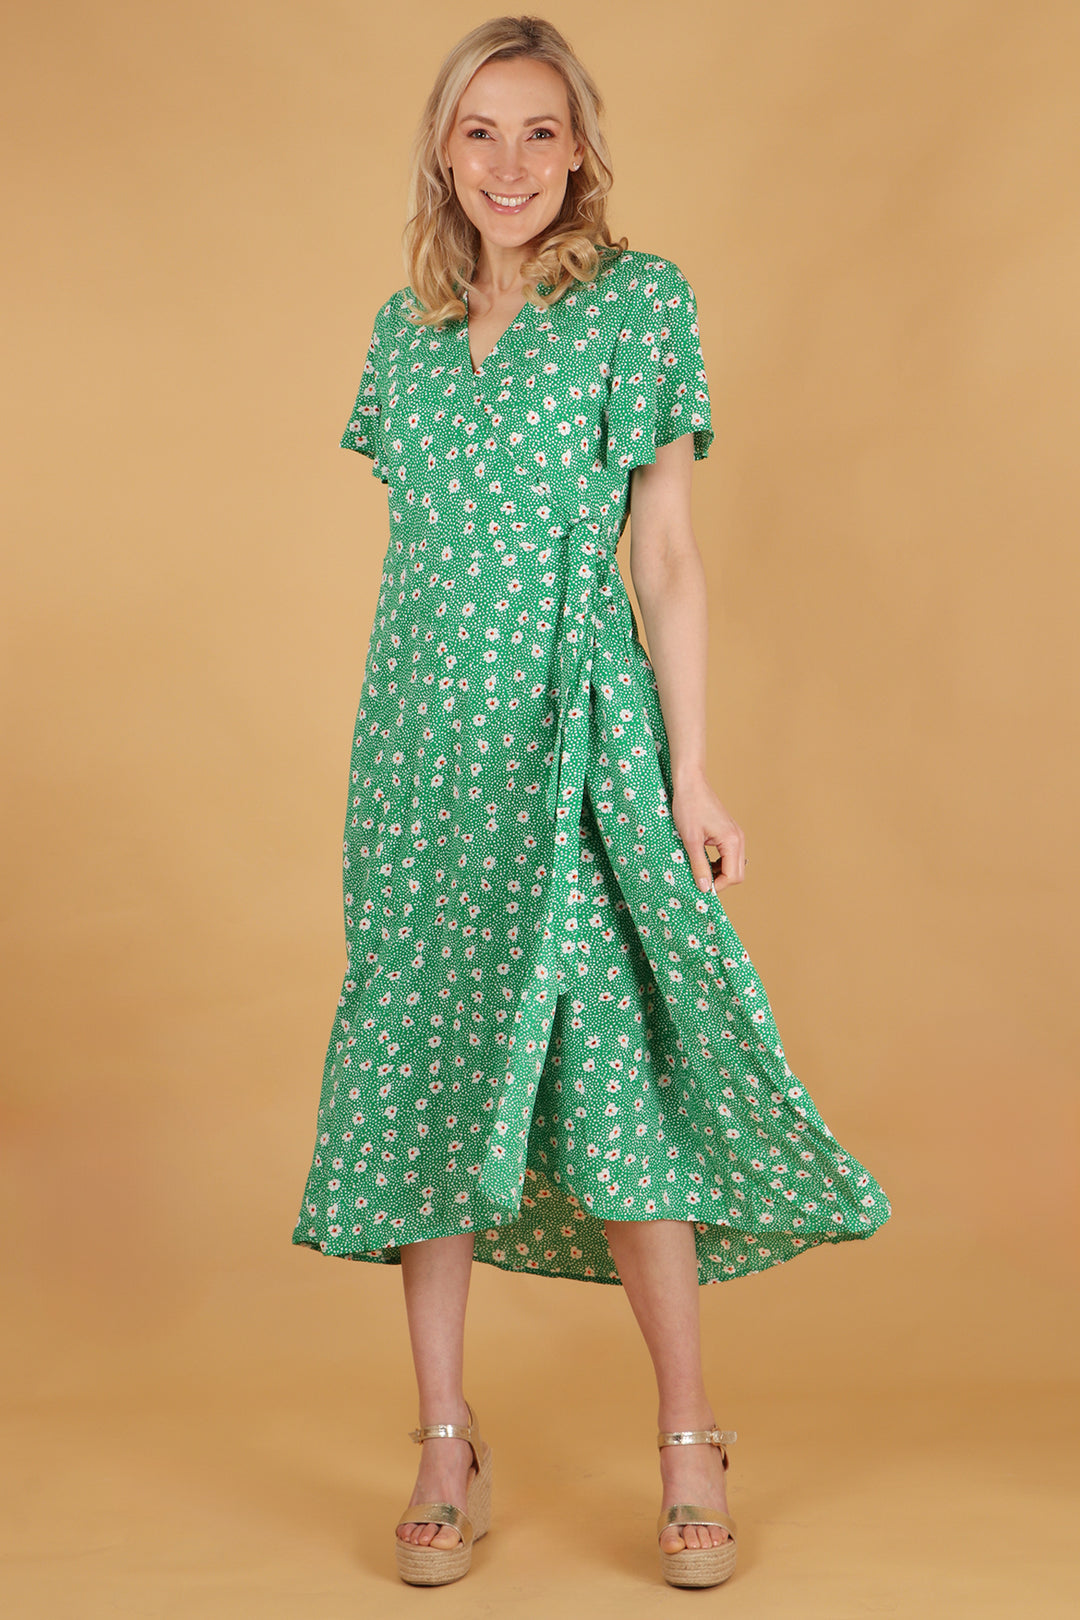 model wearing a green midi length wrap dress with an all over white daisy floral pattern. the dress has short sleeves, waist tie and vneck